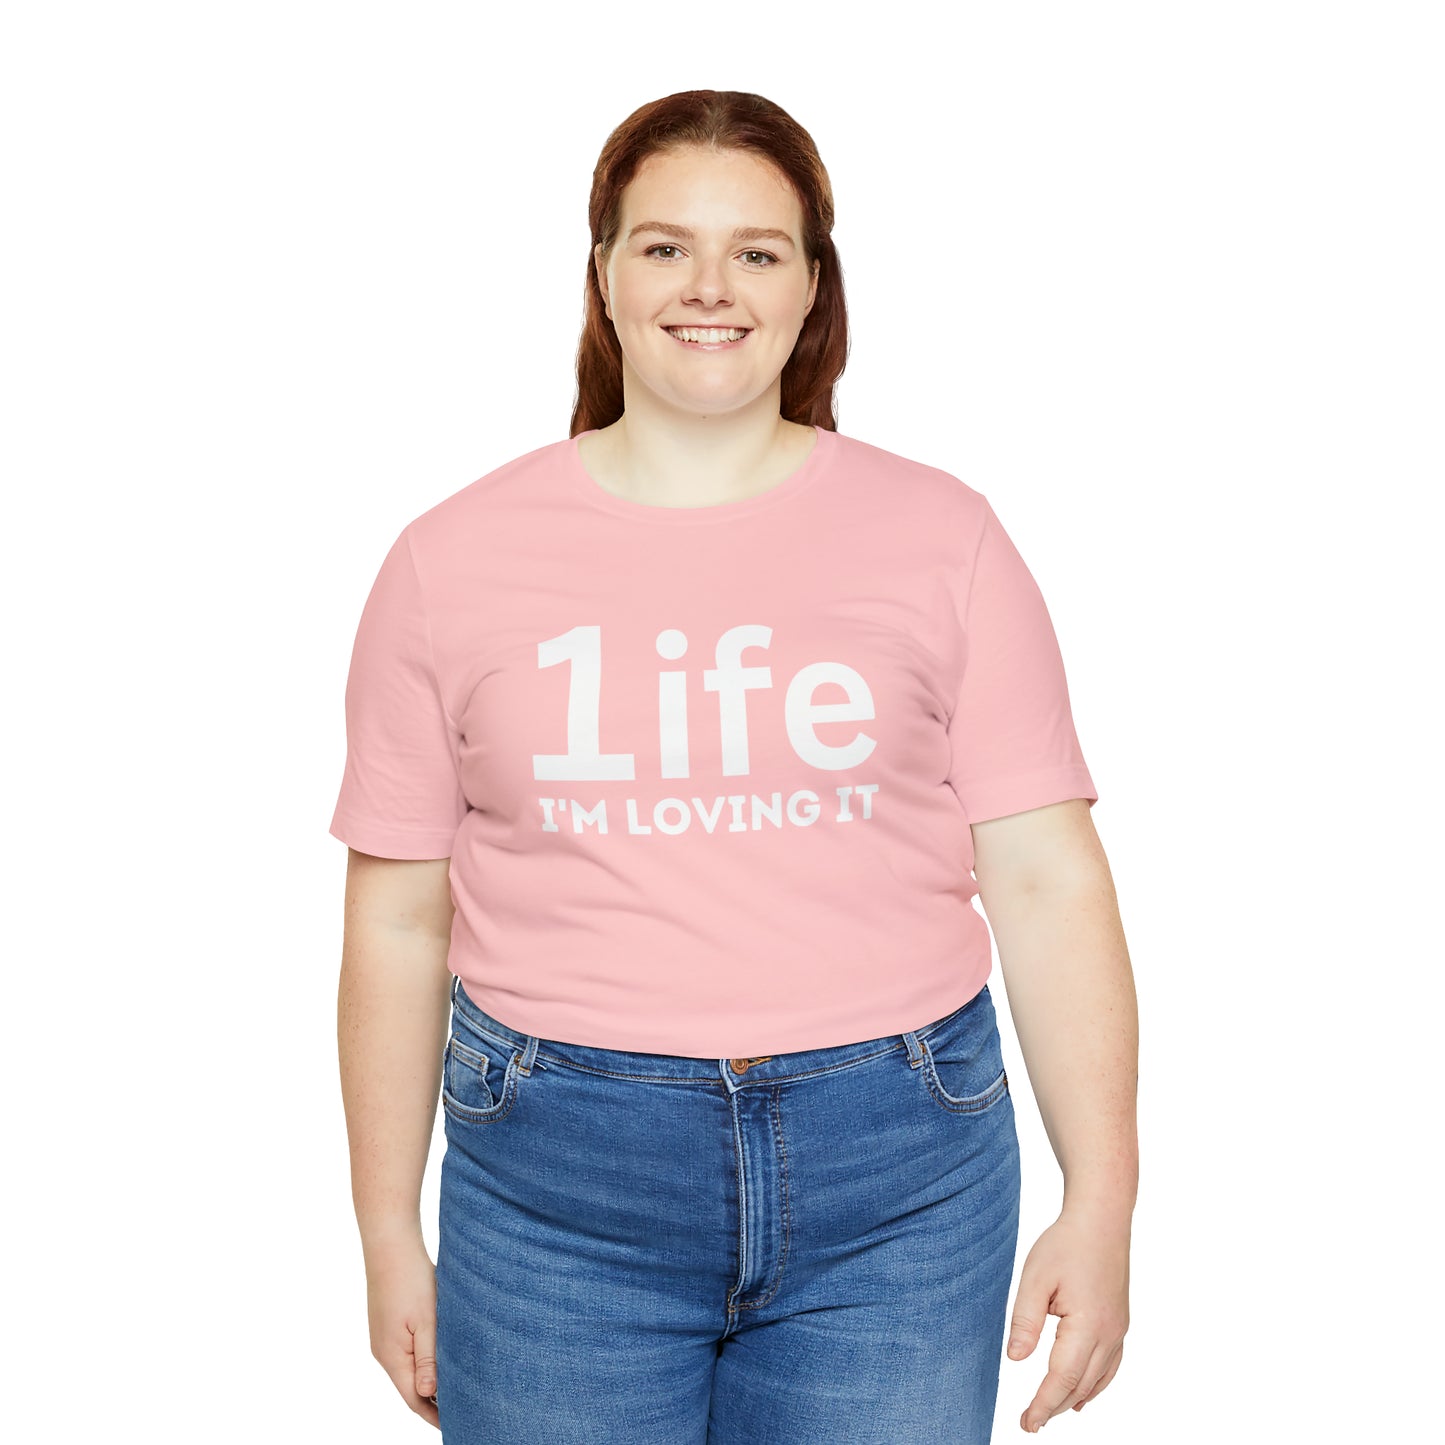 One life I'M Loving It Shirt Retro 1life shirt Live Your Life You Only Have One Life To Live Retro Shirt